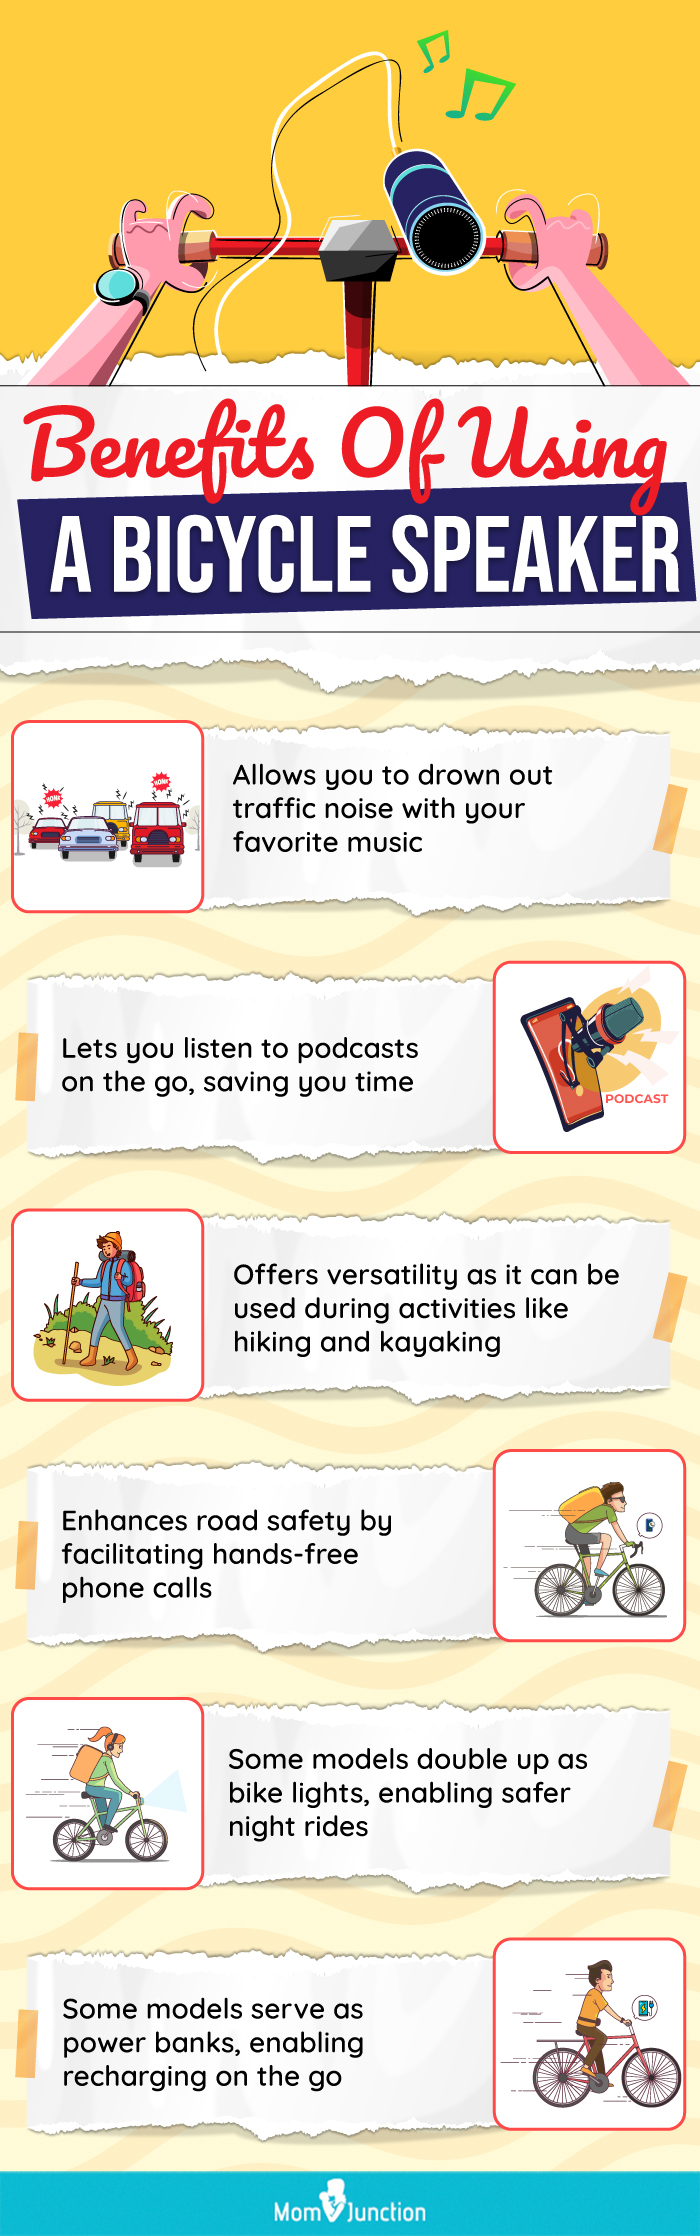 Benefits Of Using A Bicycle Speaker(infographic)